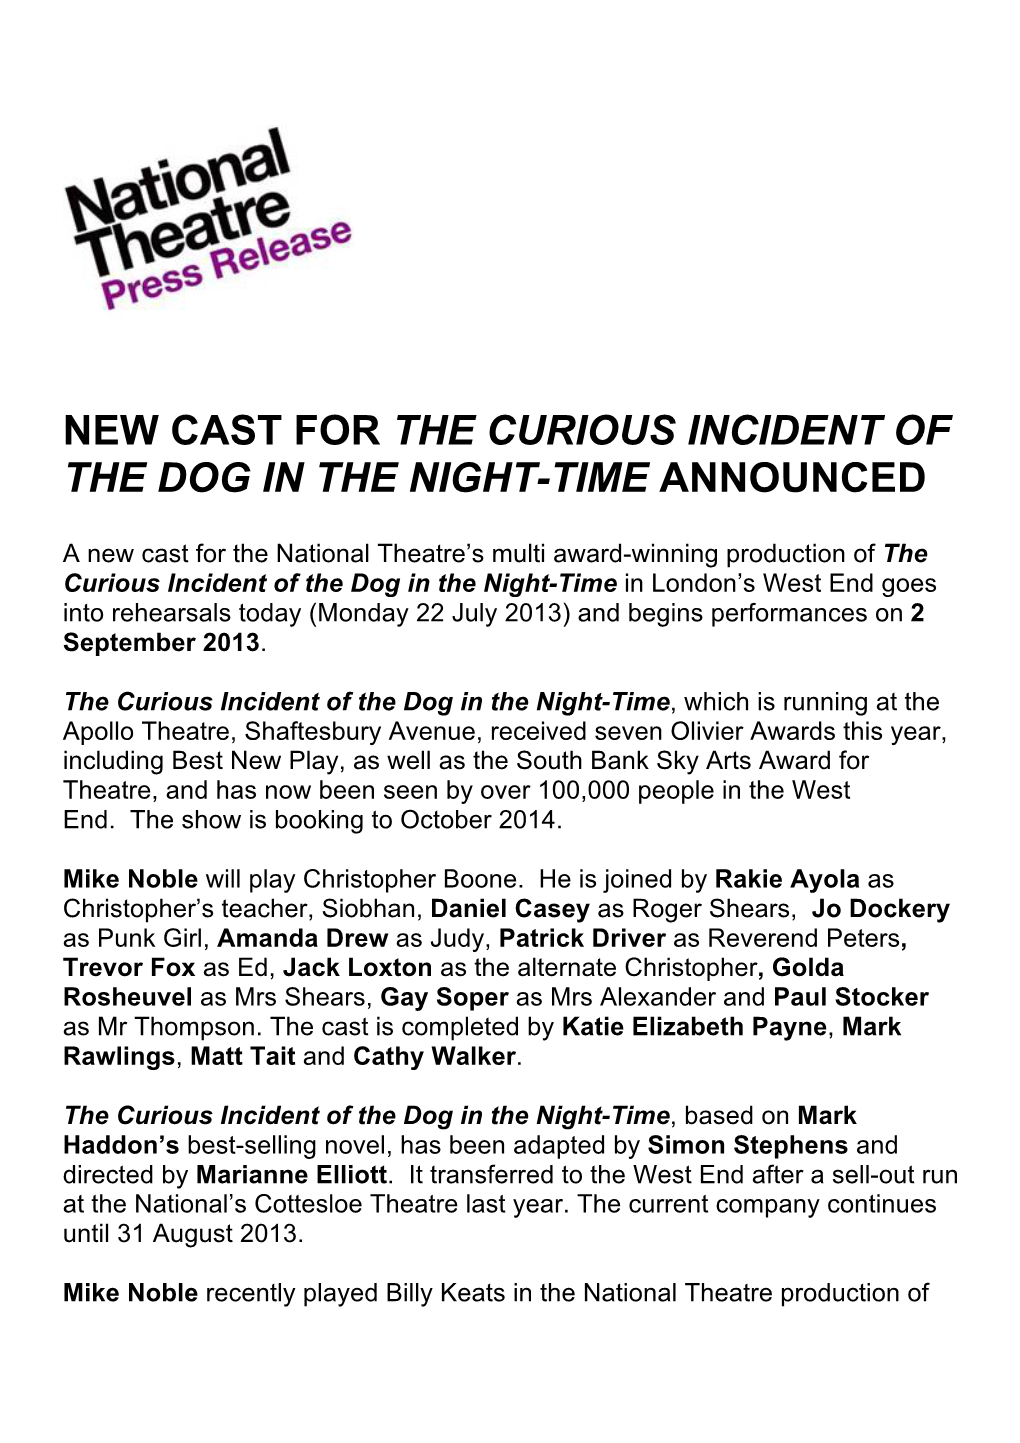 New Cast for the Curious Incident of the Dog in the Night-Time Announced